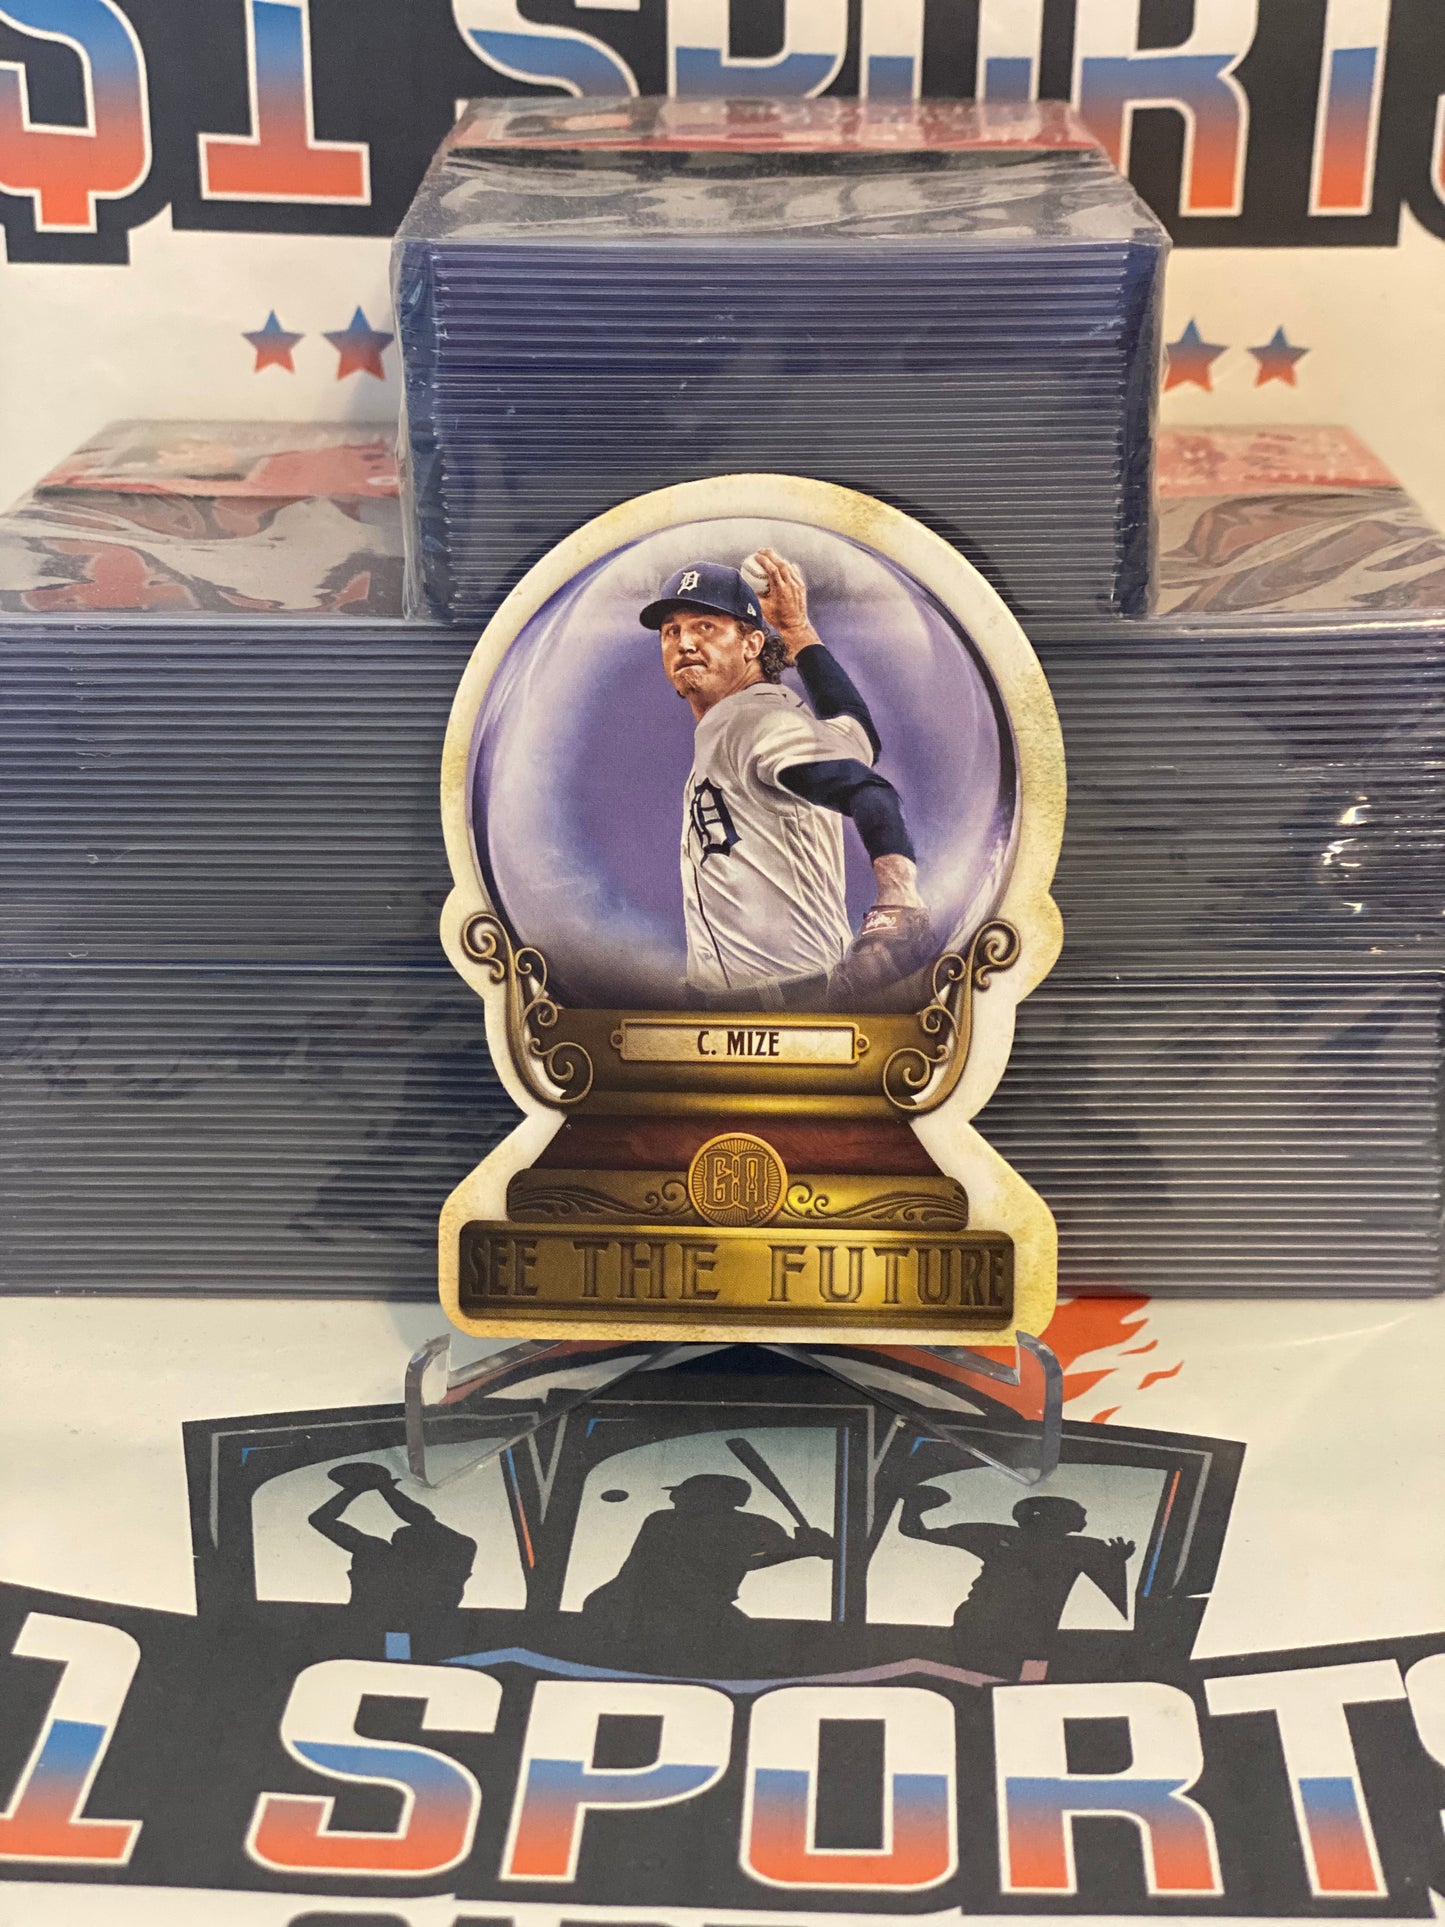 2021 Topps Gypsy Queen (See the Future) Casey Mize Rookie #GG-17